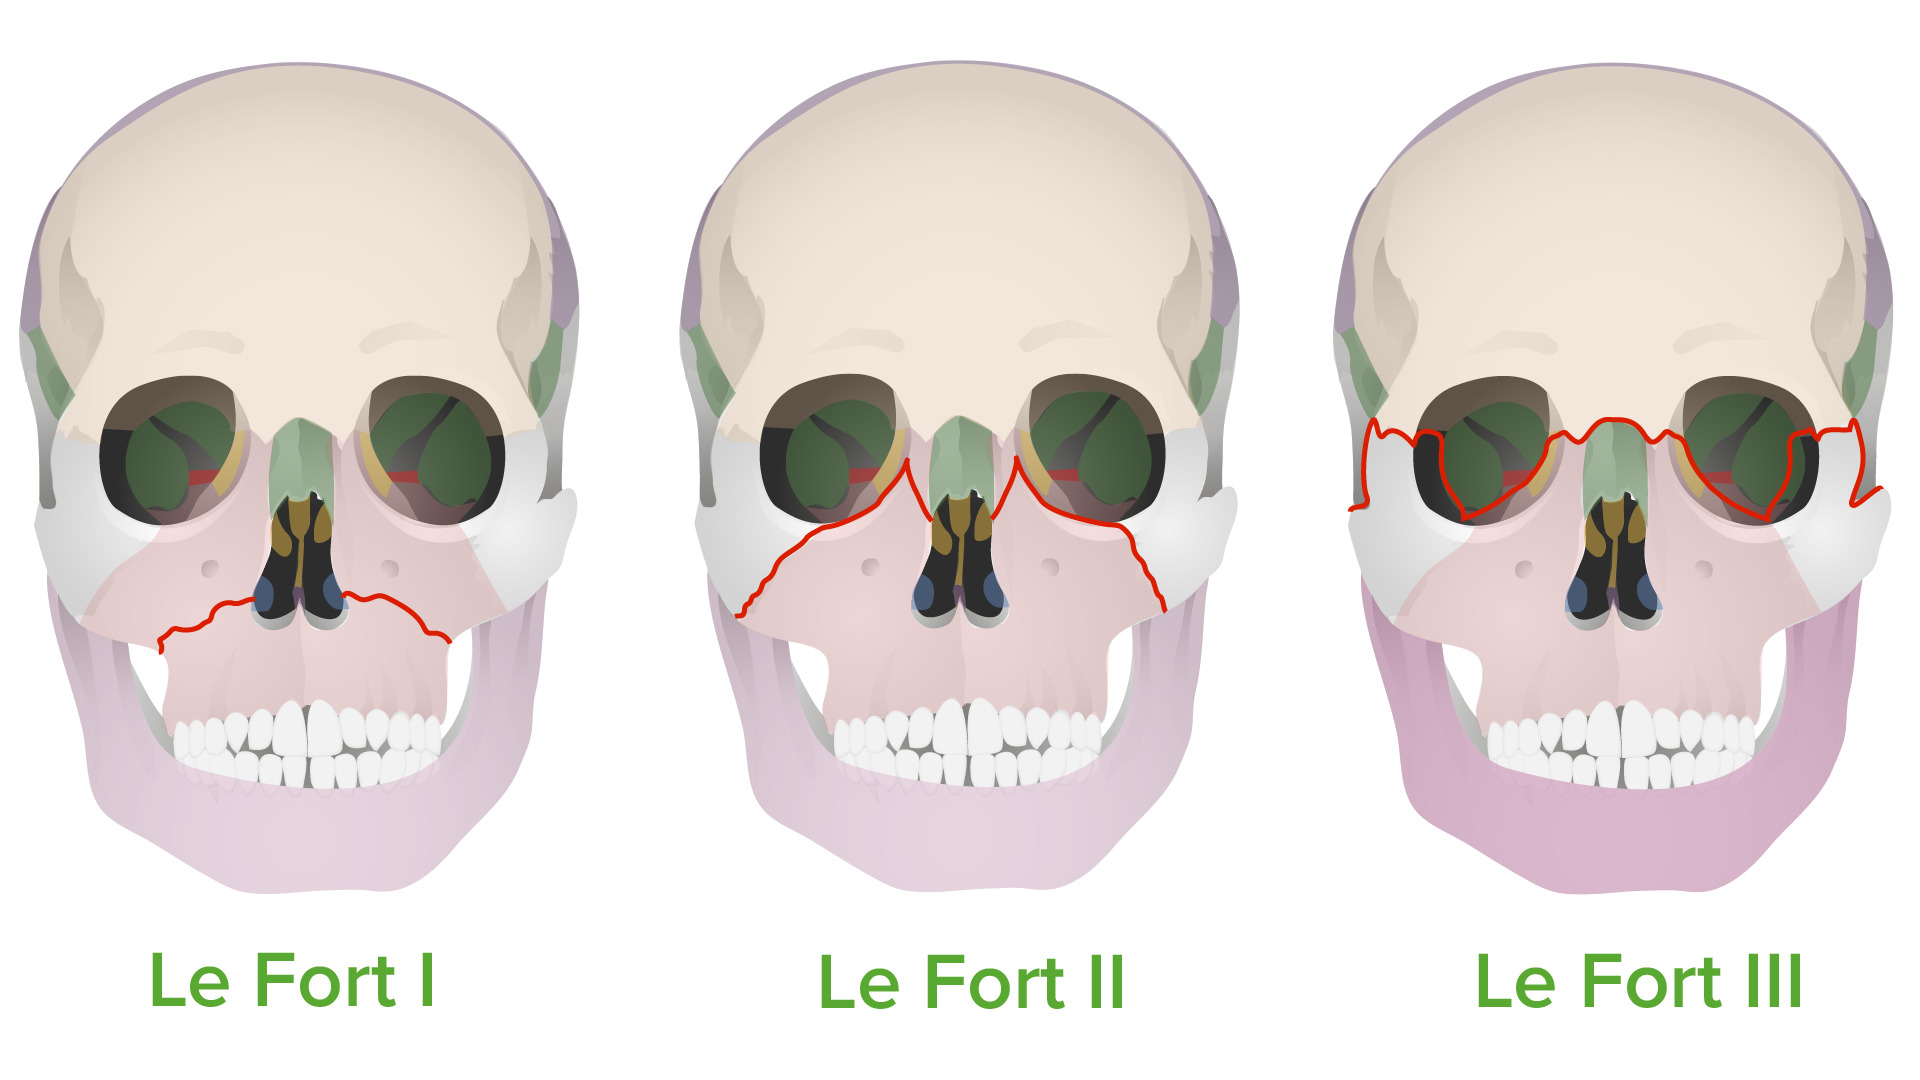 <p>LeFort 1: between alveolar and nasofrontal</p><p>LeFort 2: between nasofrontal and malar</p><p>LeFort 3: below anterior temporal and midfrontal</p><ul><li><p>most frequently occurs in high-speed car accidents or falls, or striking the face directly with a rigid object</p></li></ul>